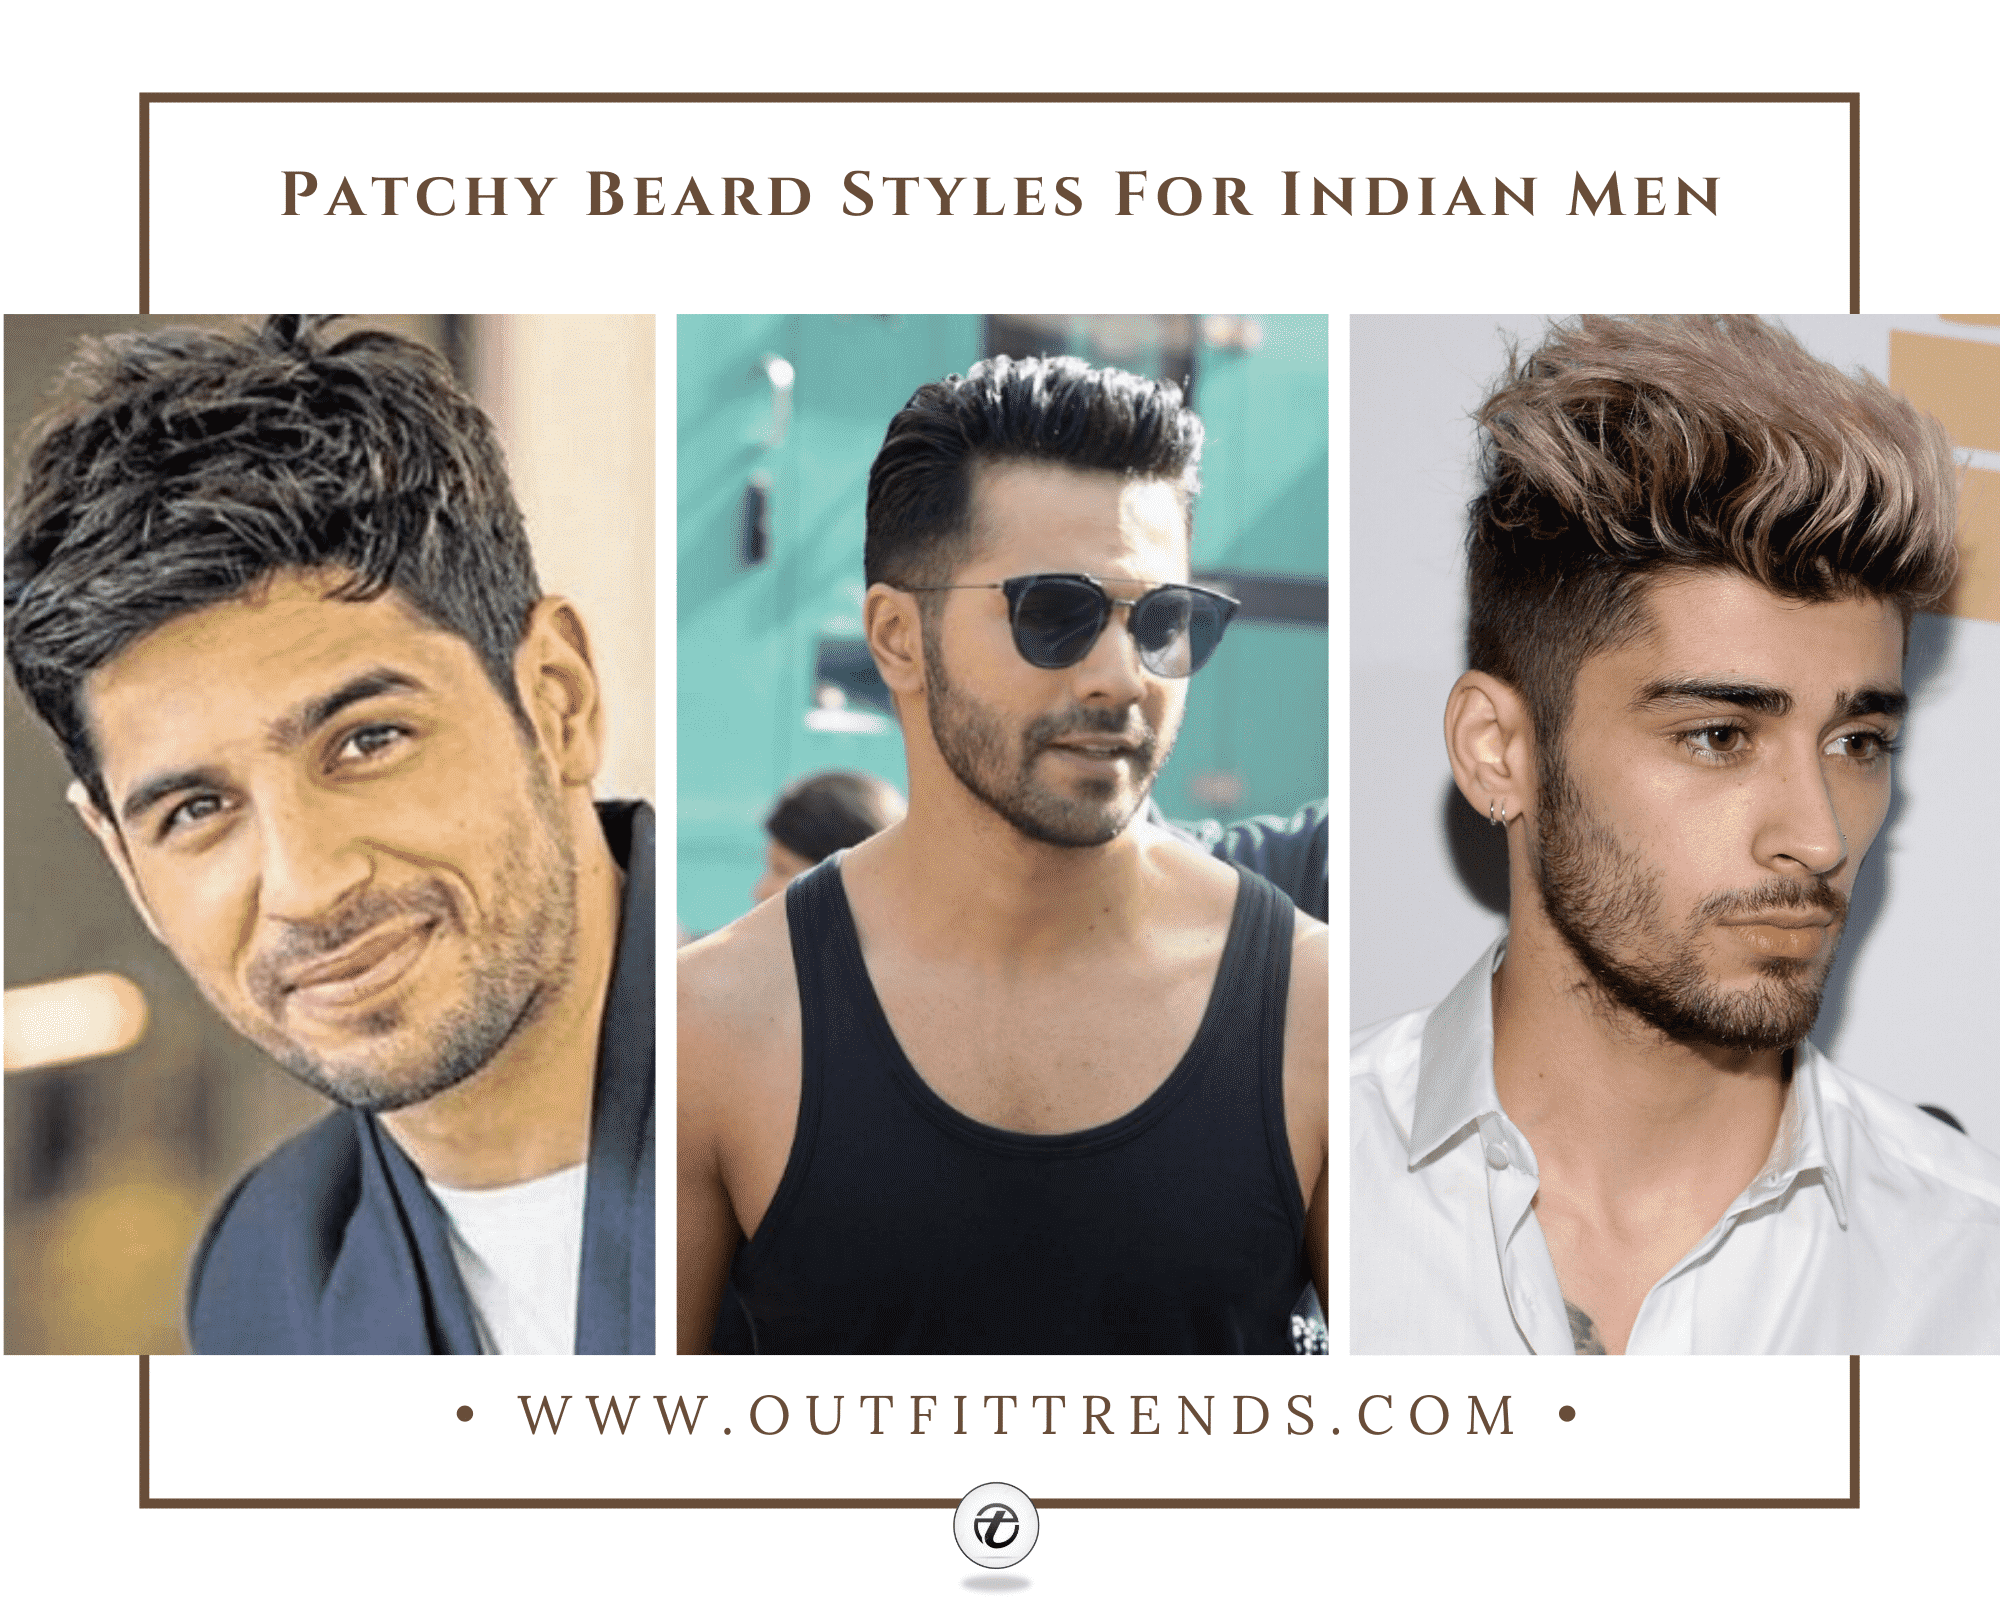 20 Patchy Beard Styles For Indian Men | Tips & Styling Ideas's patchy beard styles